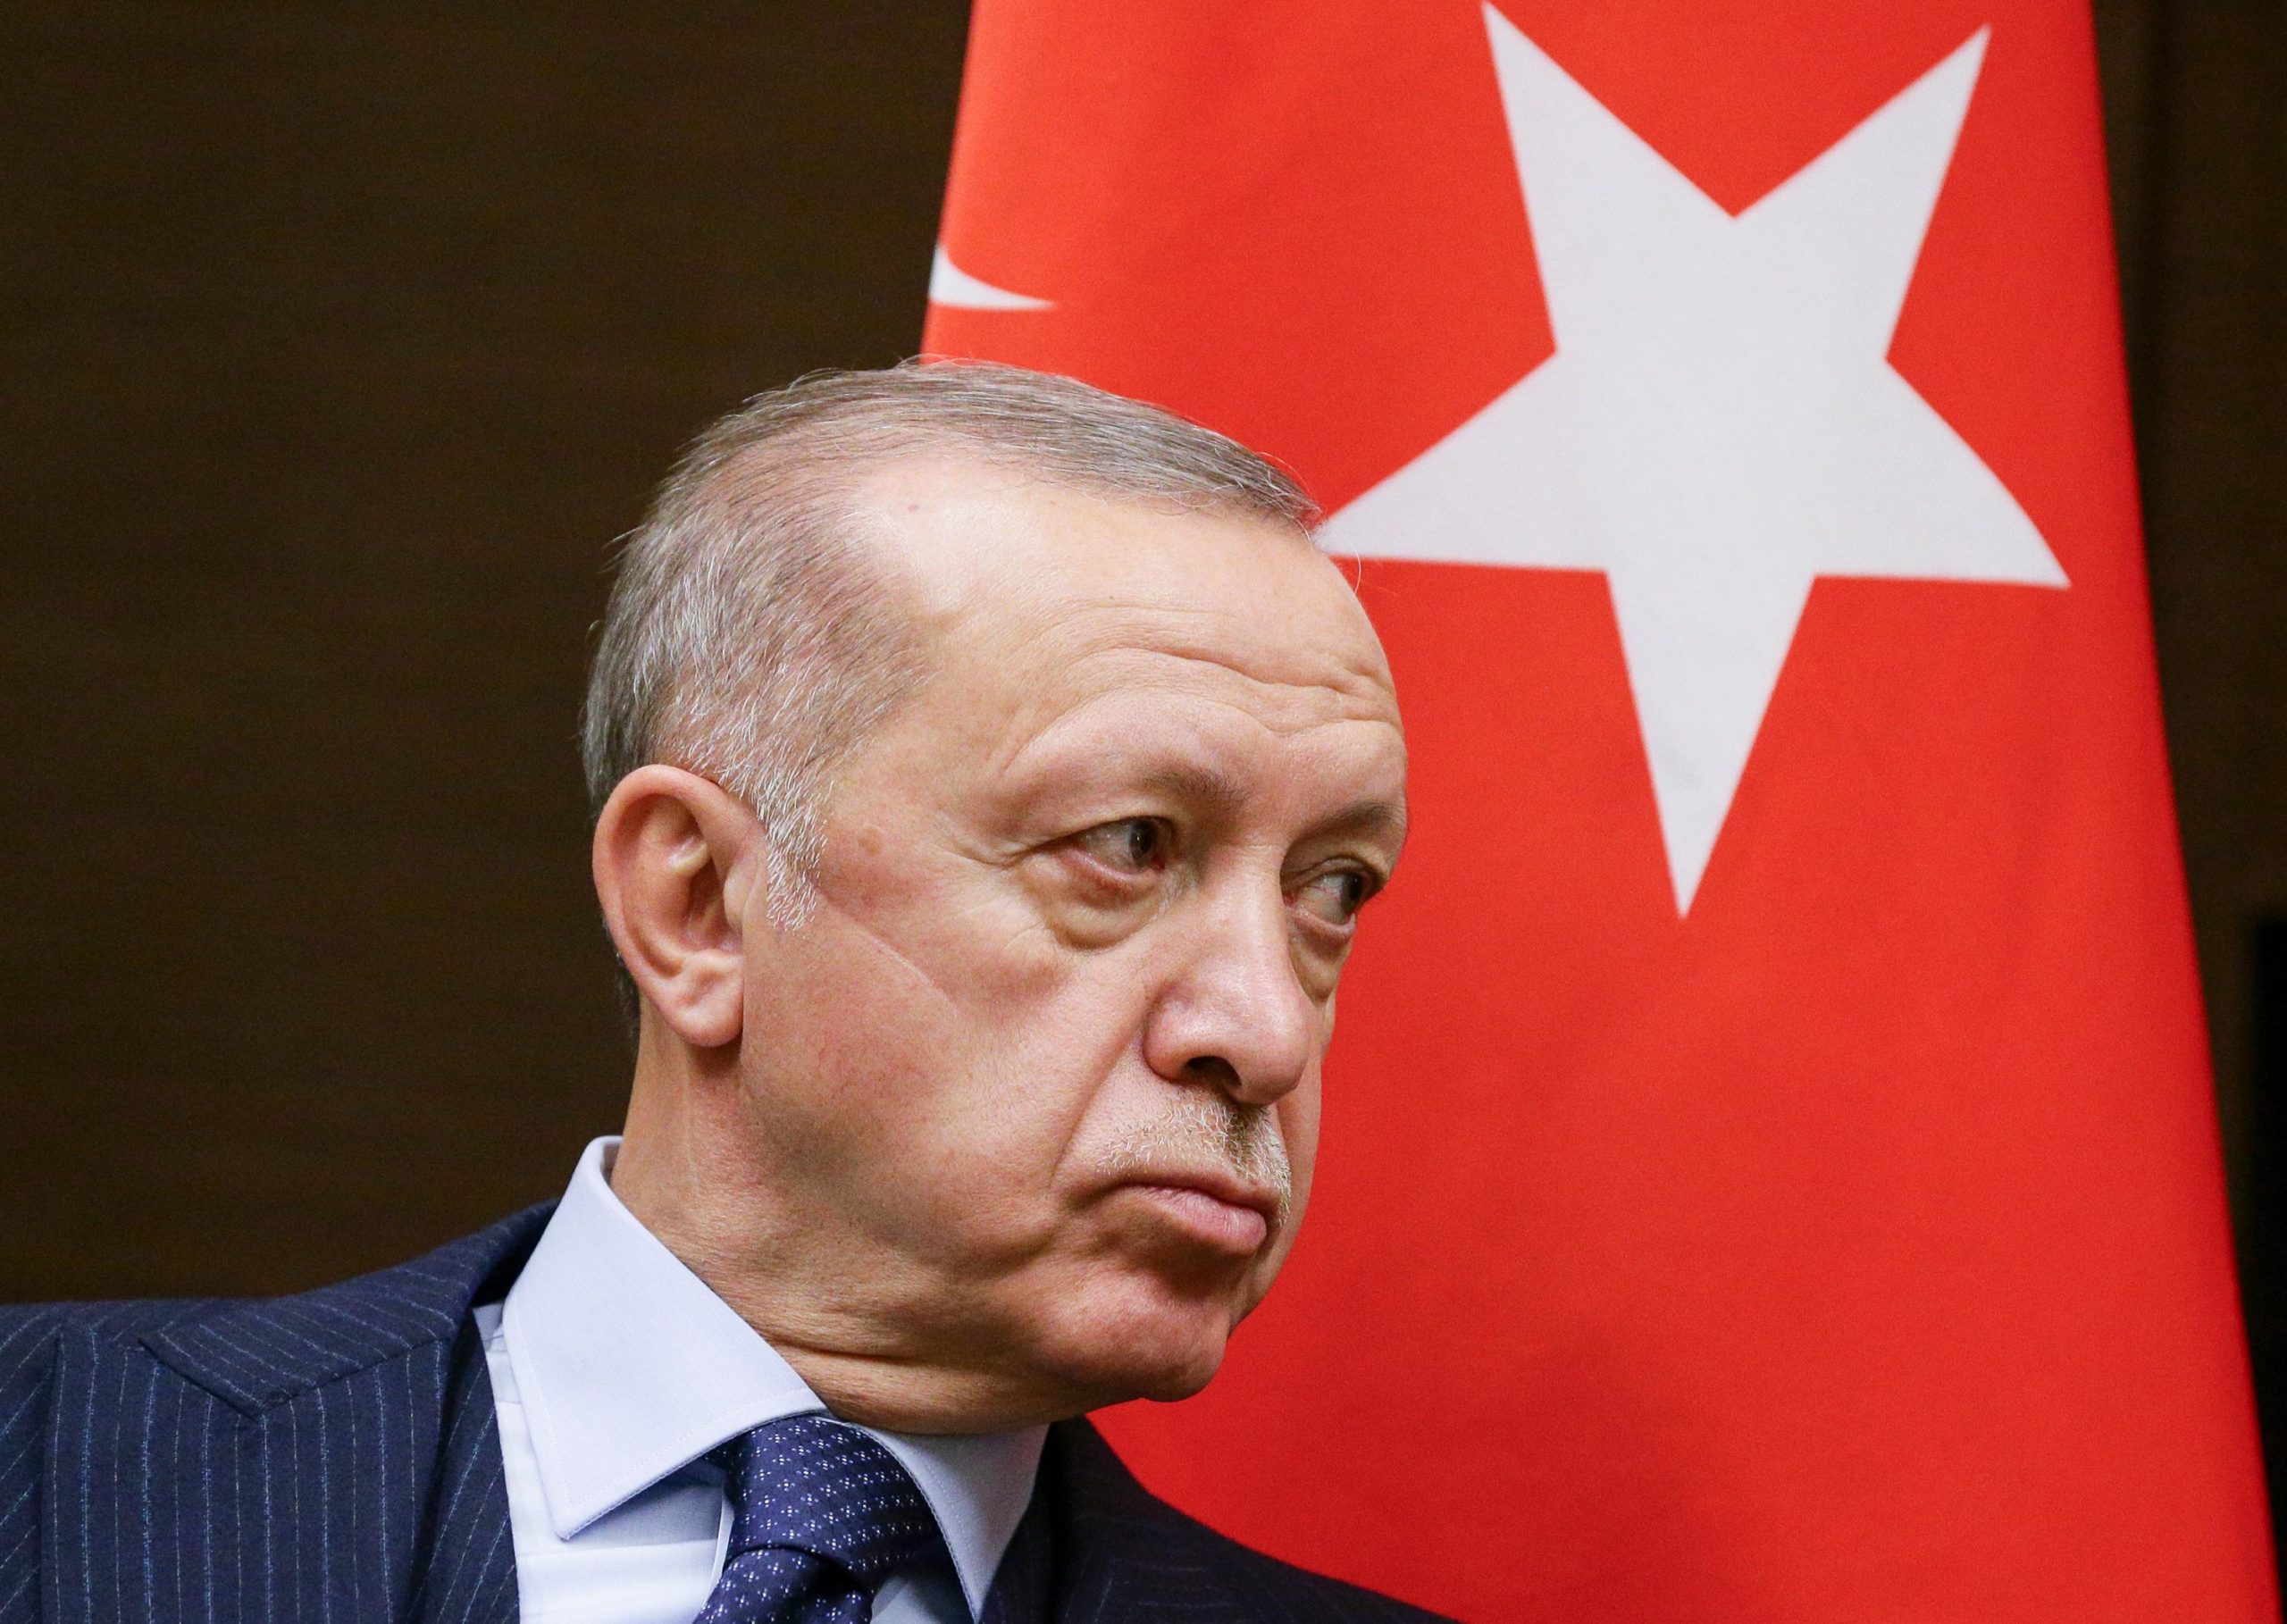 Turkey wants compensation for ouster from US-led jet program 4